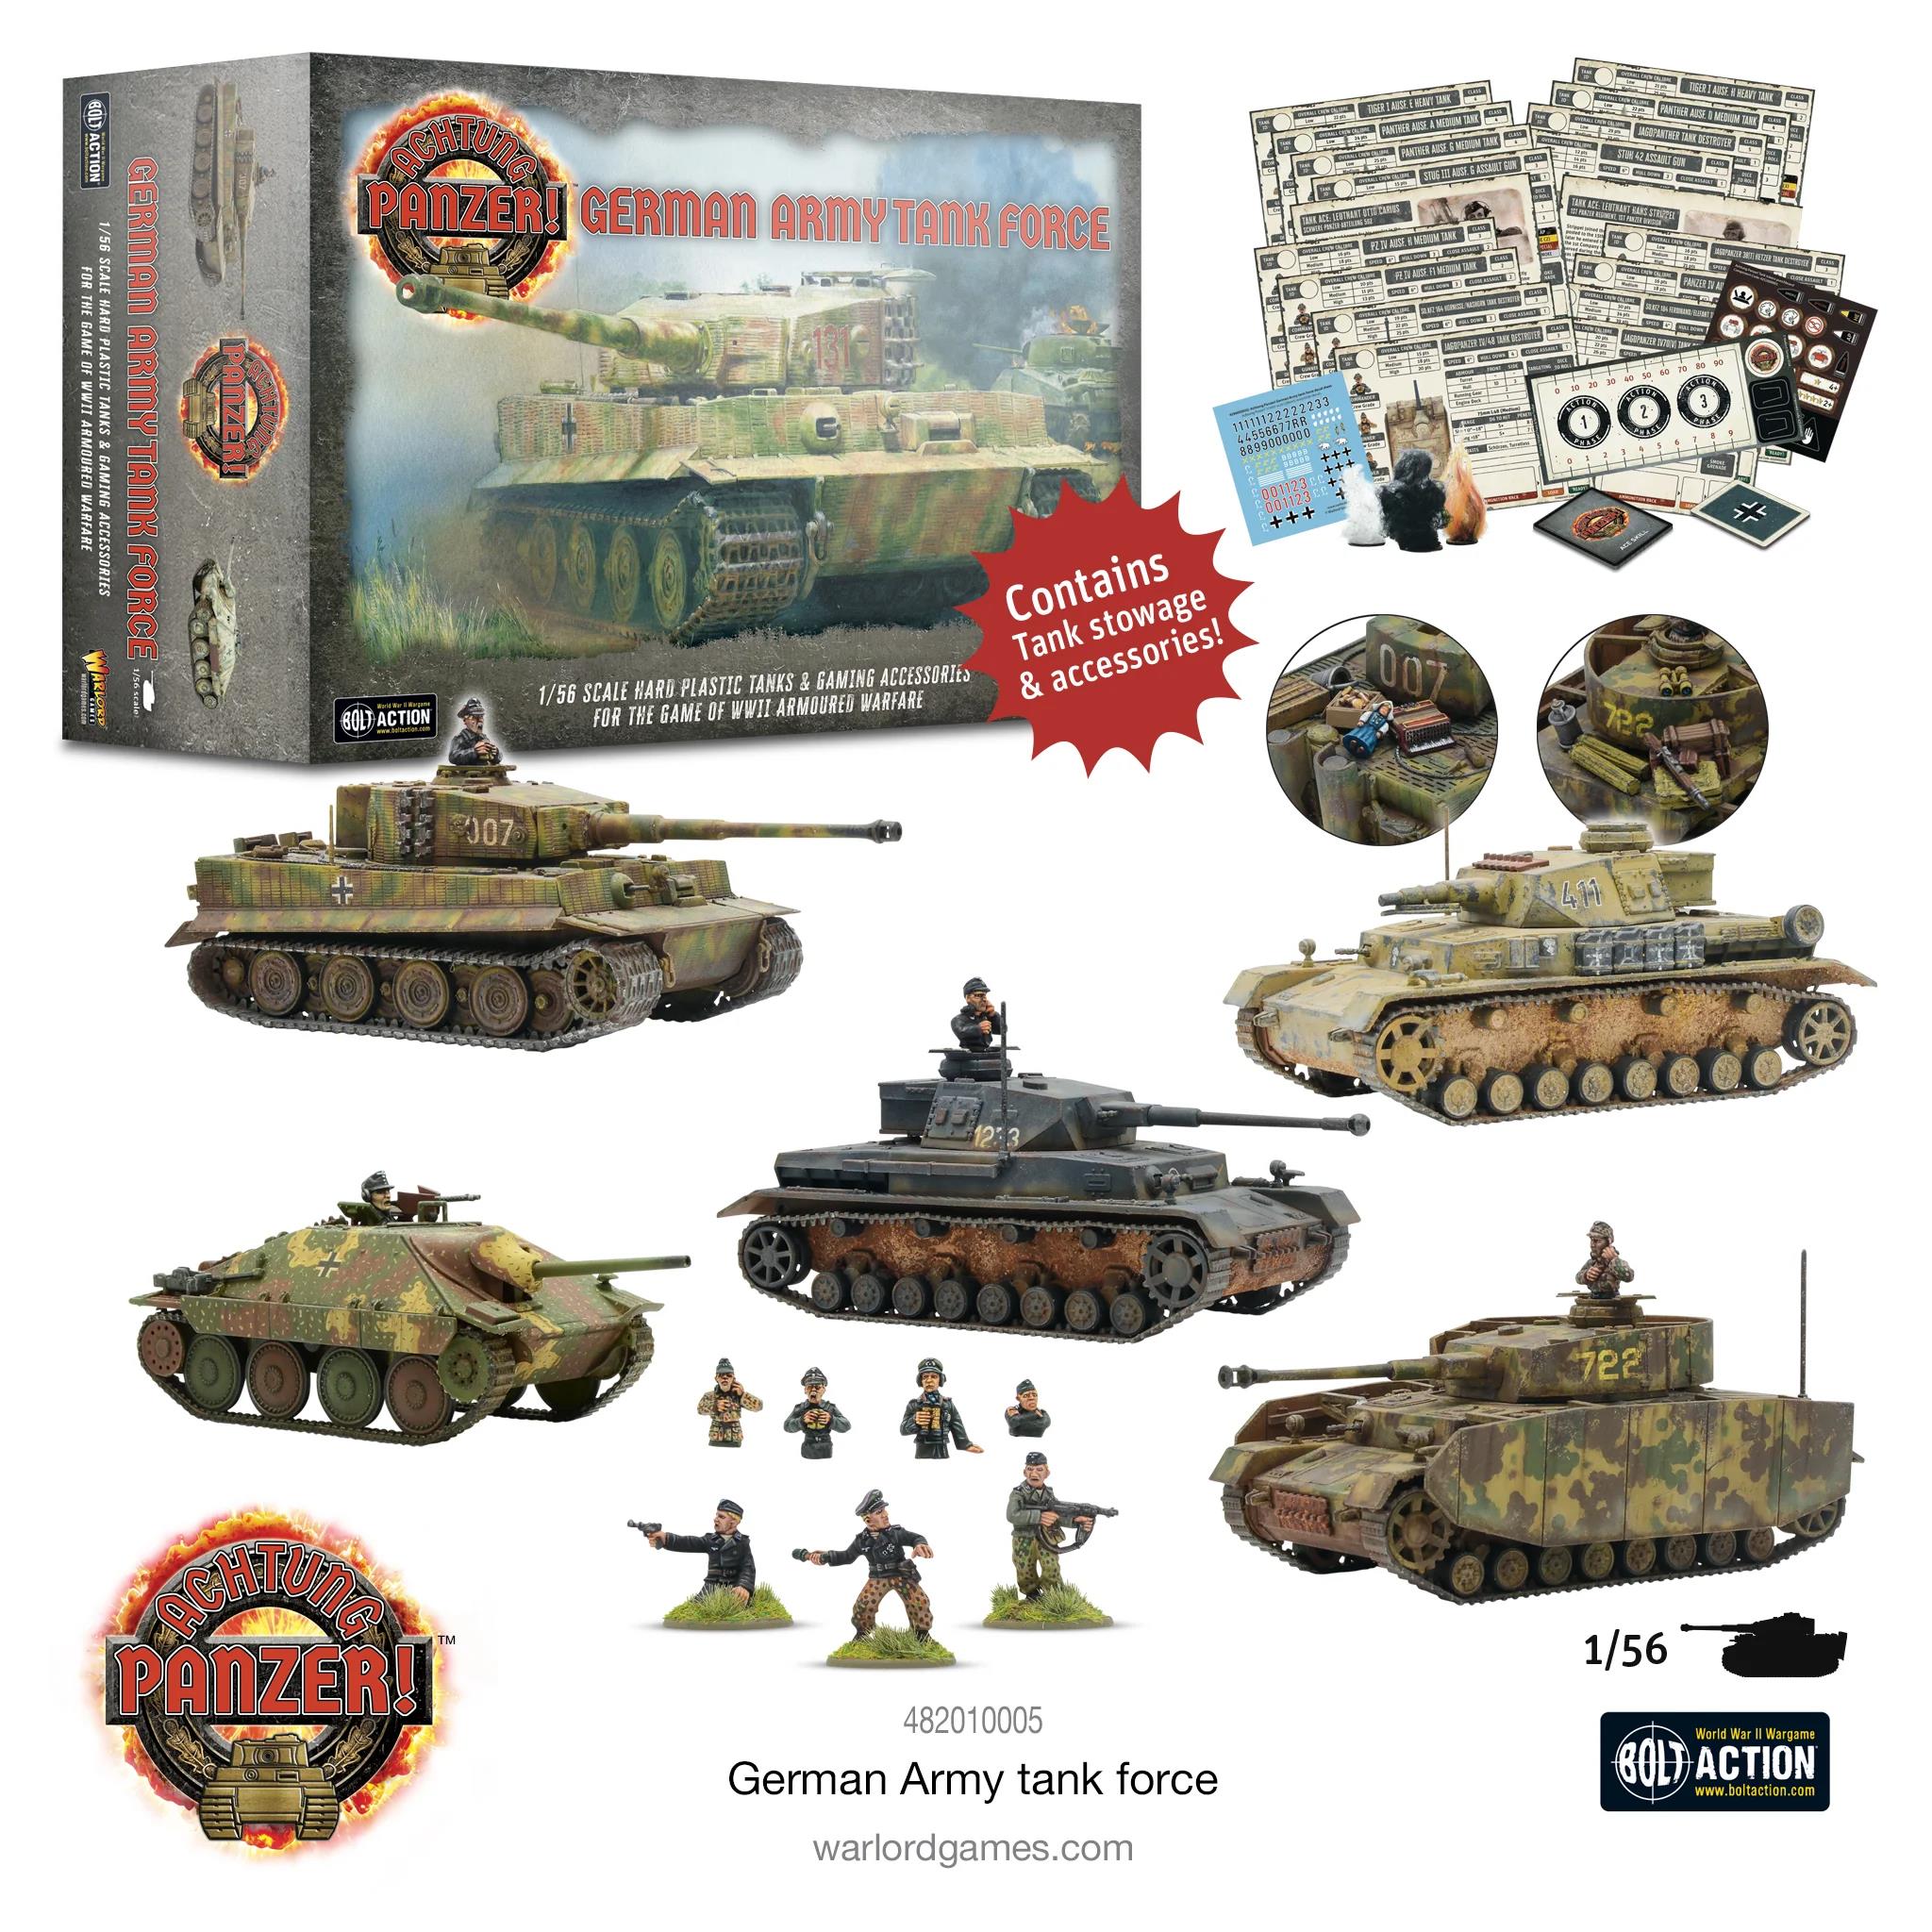 Achtung Panzer: German Army Tank Force